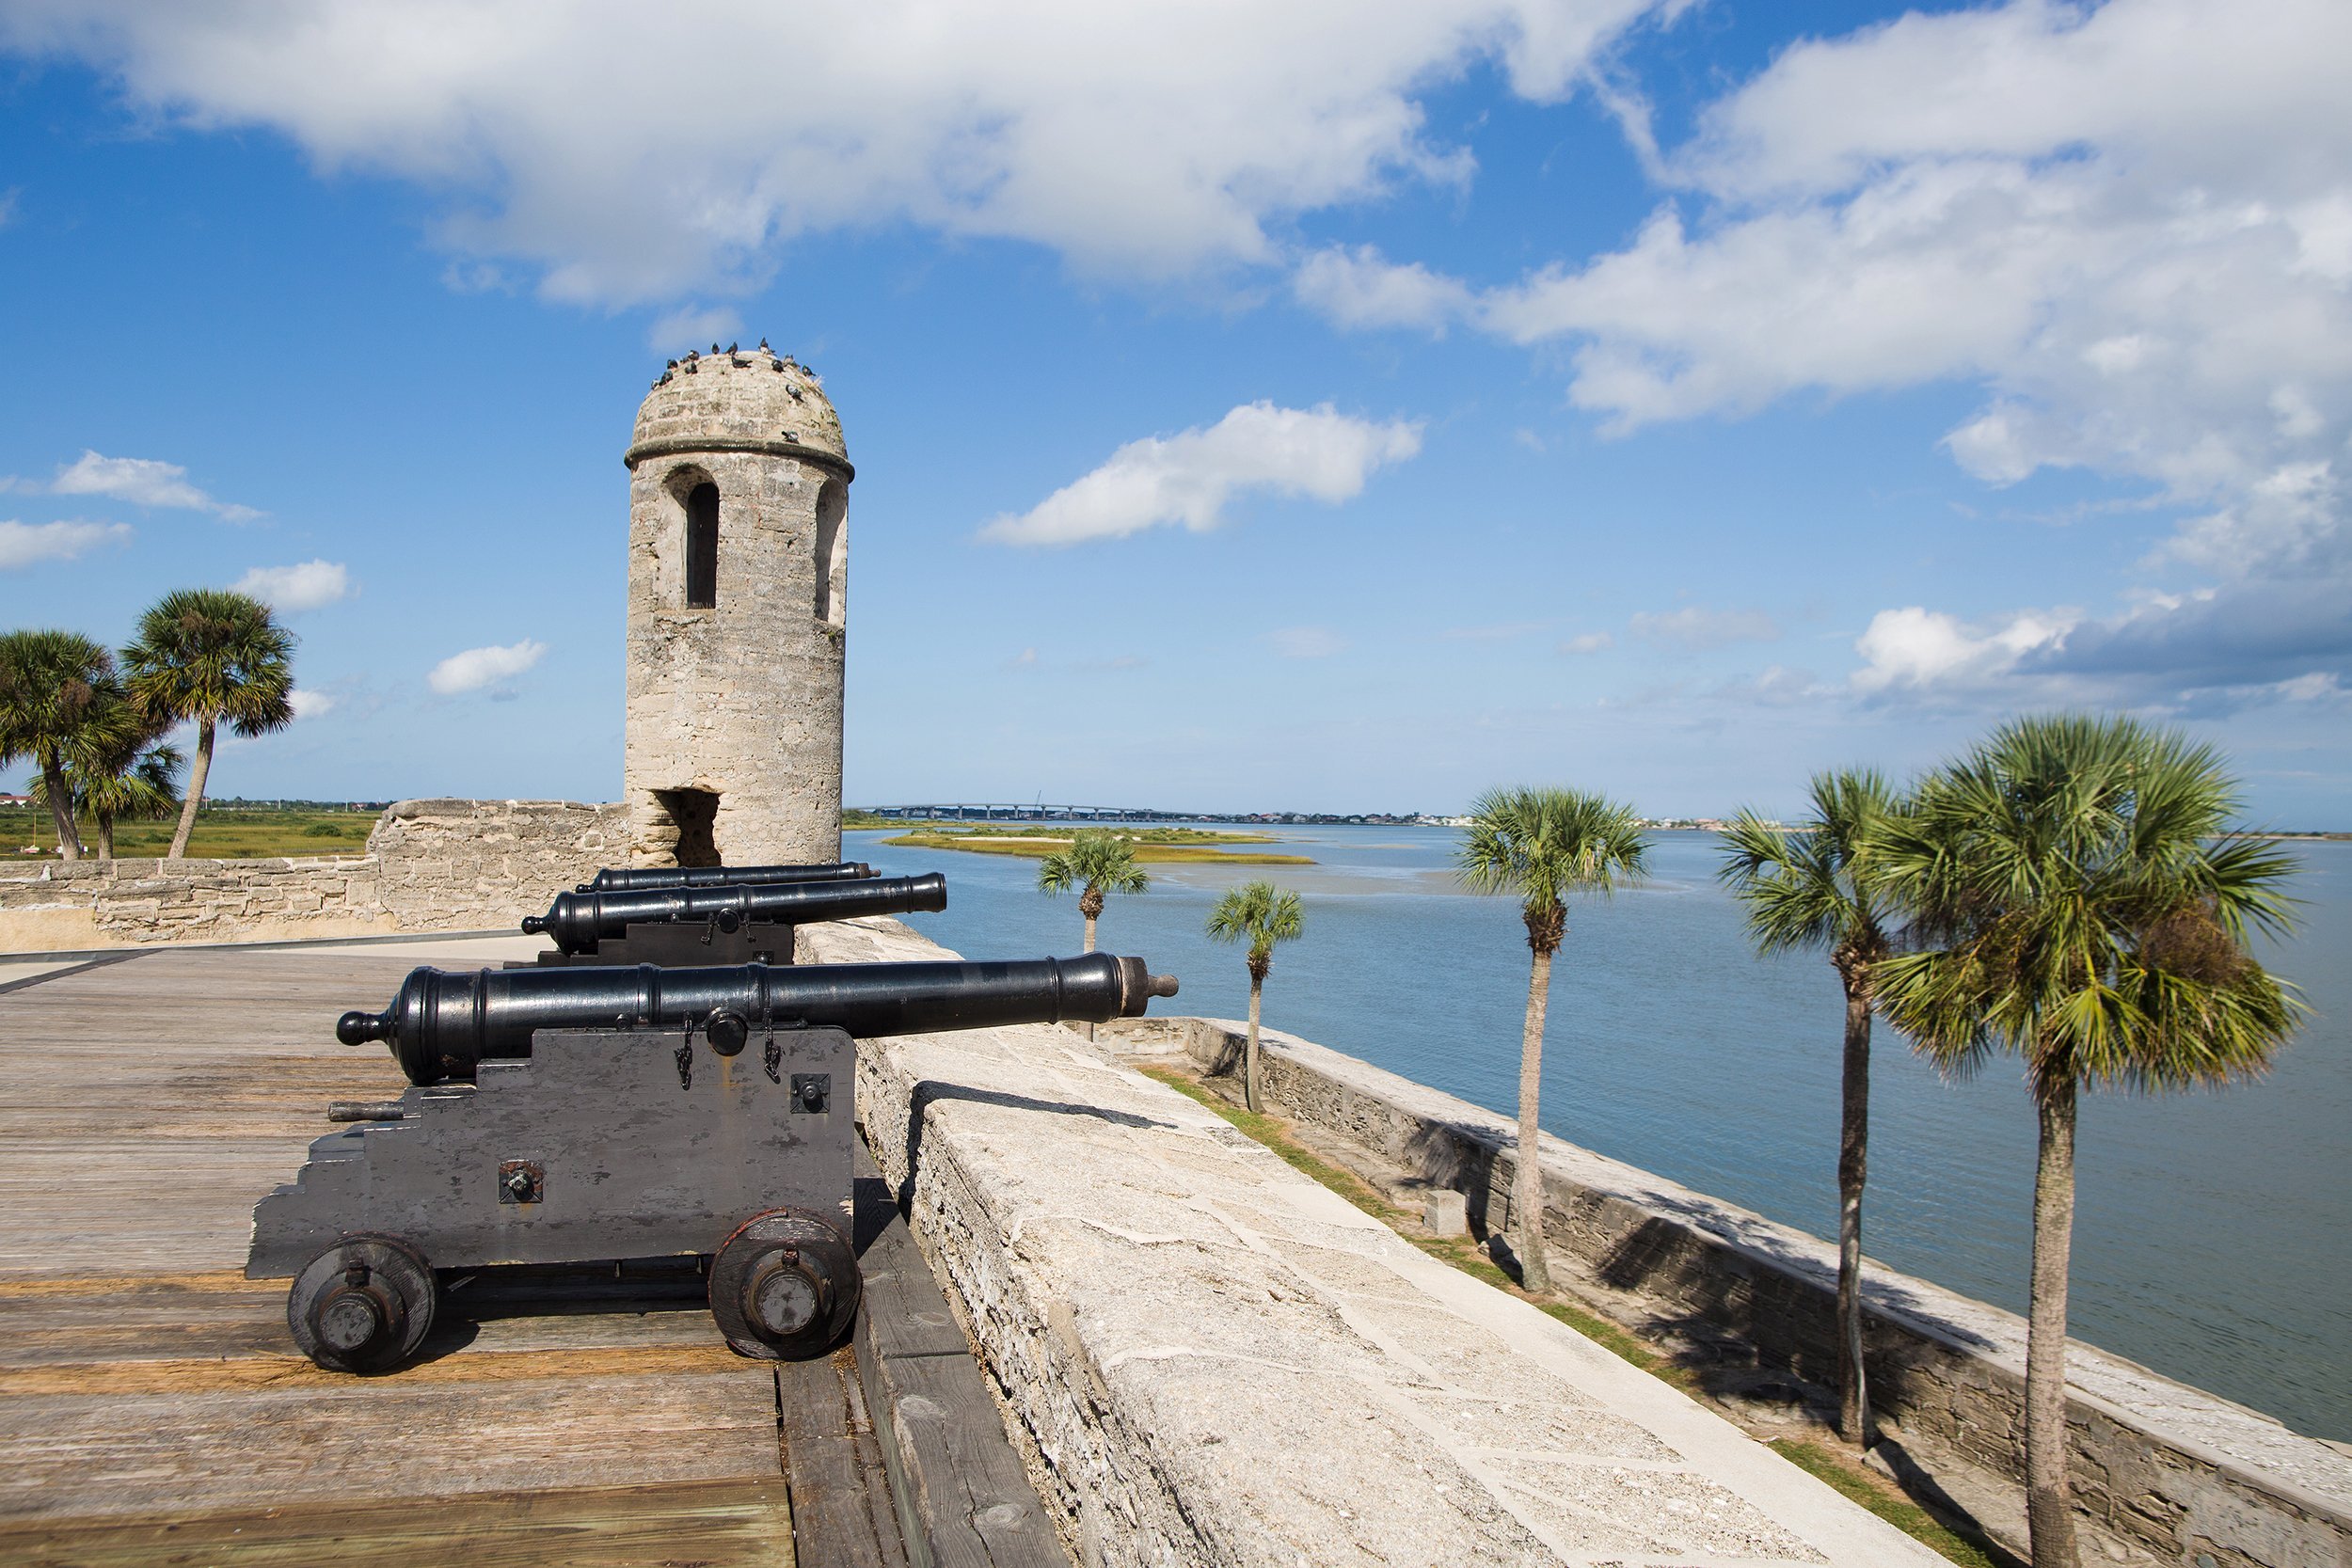 <p><strong>Location:</strong> St. Augustine, Florida <br><strong>Era:</strong> 1500s-1600s <br><strong>What to do:</strong> In the nation's oldest city, don't miss <a href="https://www.nps.gov/casa/planyourvisit/feesandreservations.htm">Castillo de San Marcos</a>, constructed by the Spanish when Florida was part of their empire. Re-enactors are on hand to give historical weapons demonstrations, firing cannons and muskets every weekend. <br><strong>Cost:</strong> $15 for ages 16 and up</p>